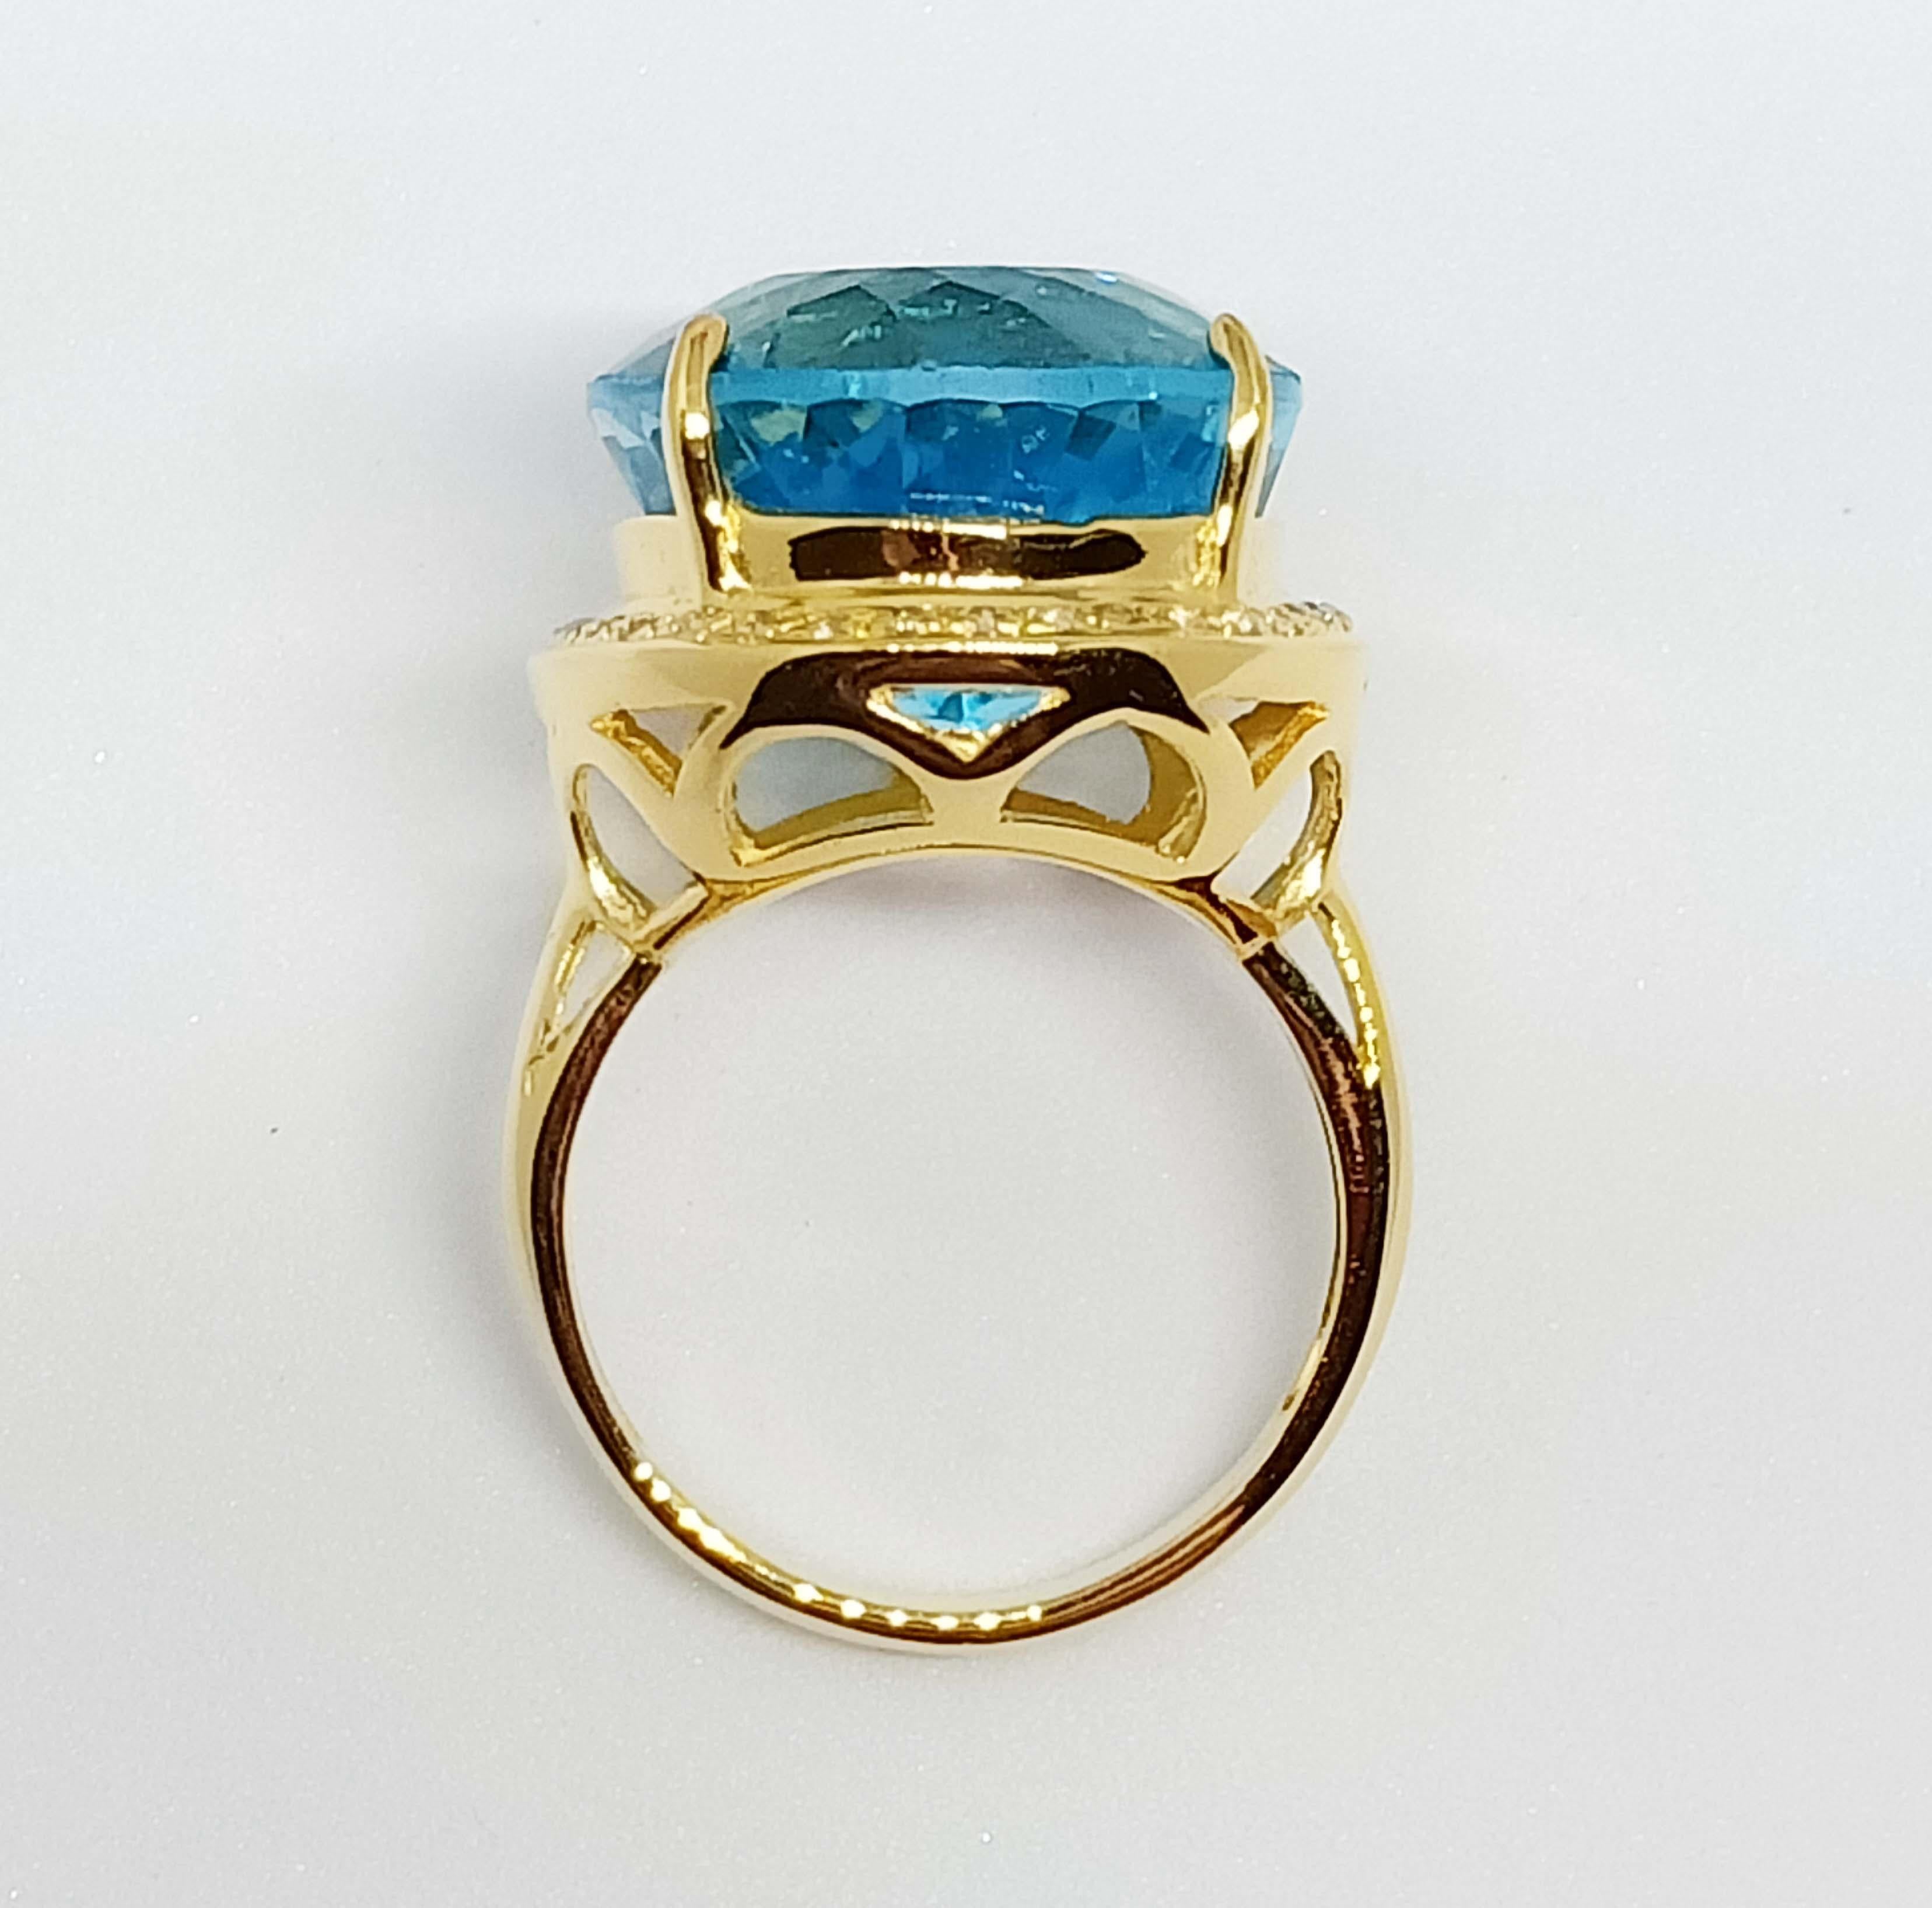 25.19 cts Swiss BlueTopaz Sterling Silver In 18K Gold Plated For Sale 1